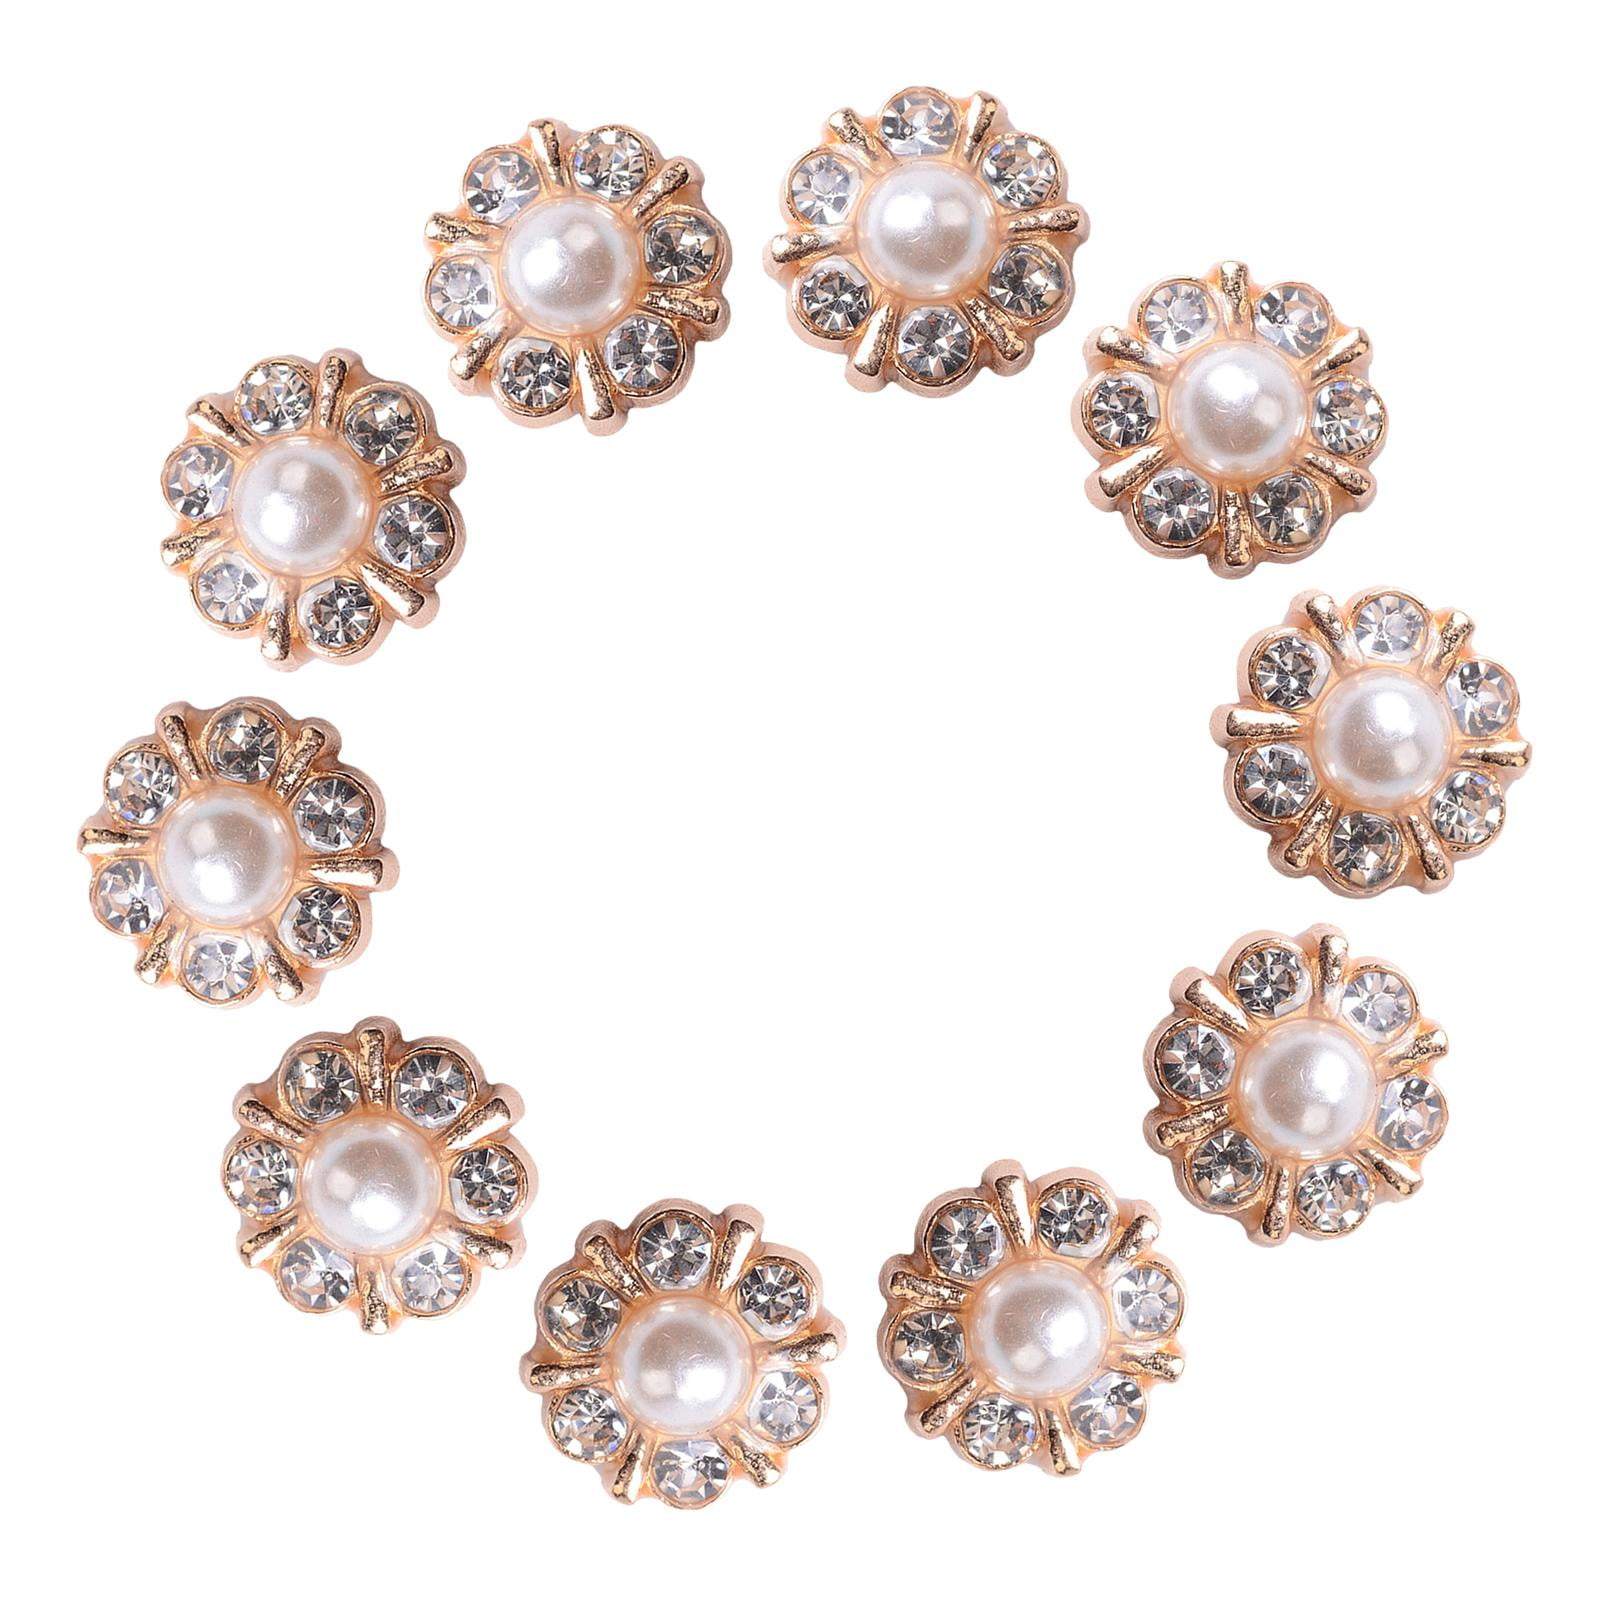 10 Pieces Rhinestone Buttons Sew On for Sewing Scrapbooking Jewelry Making